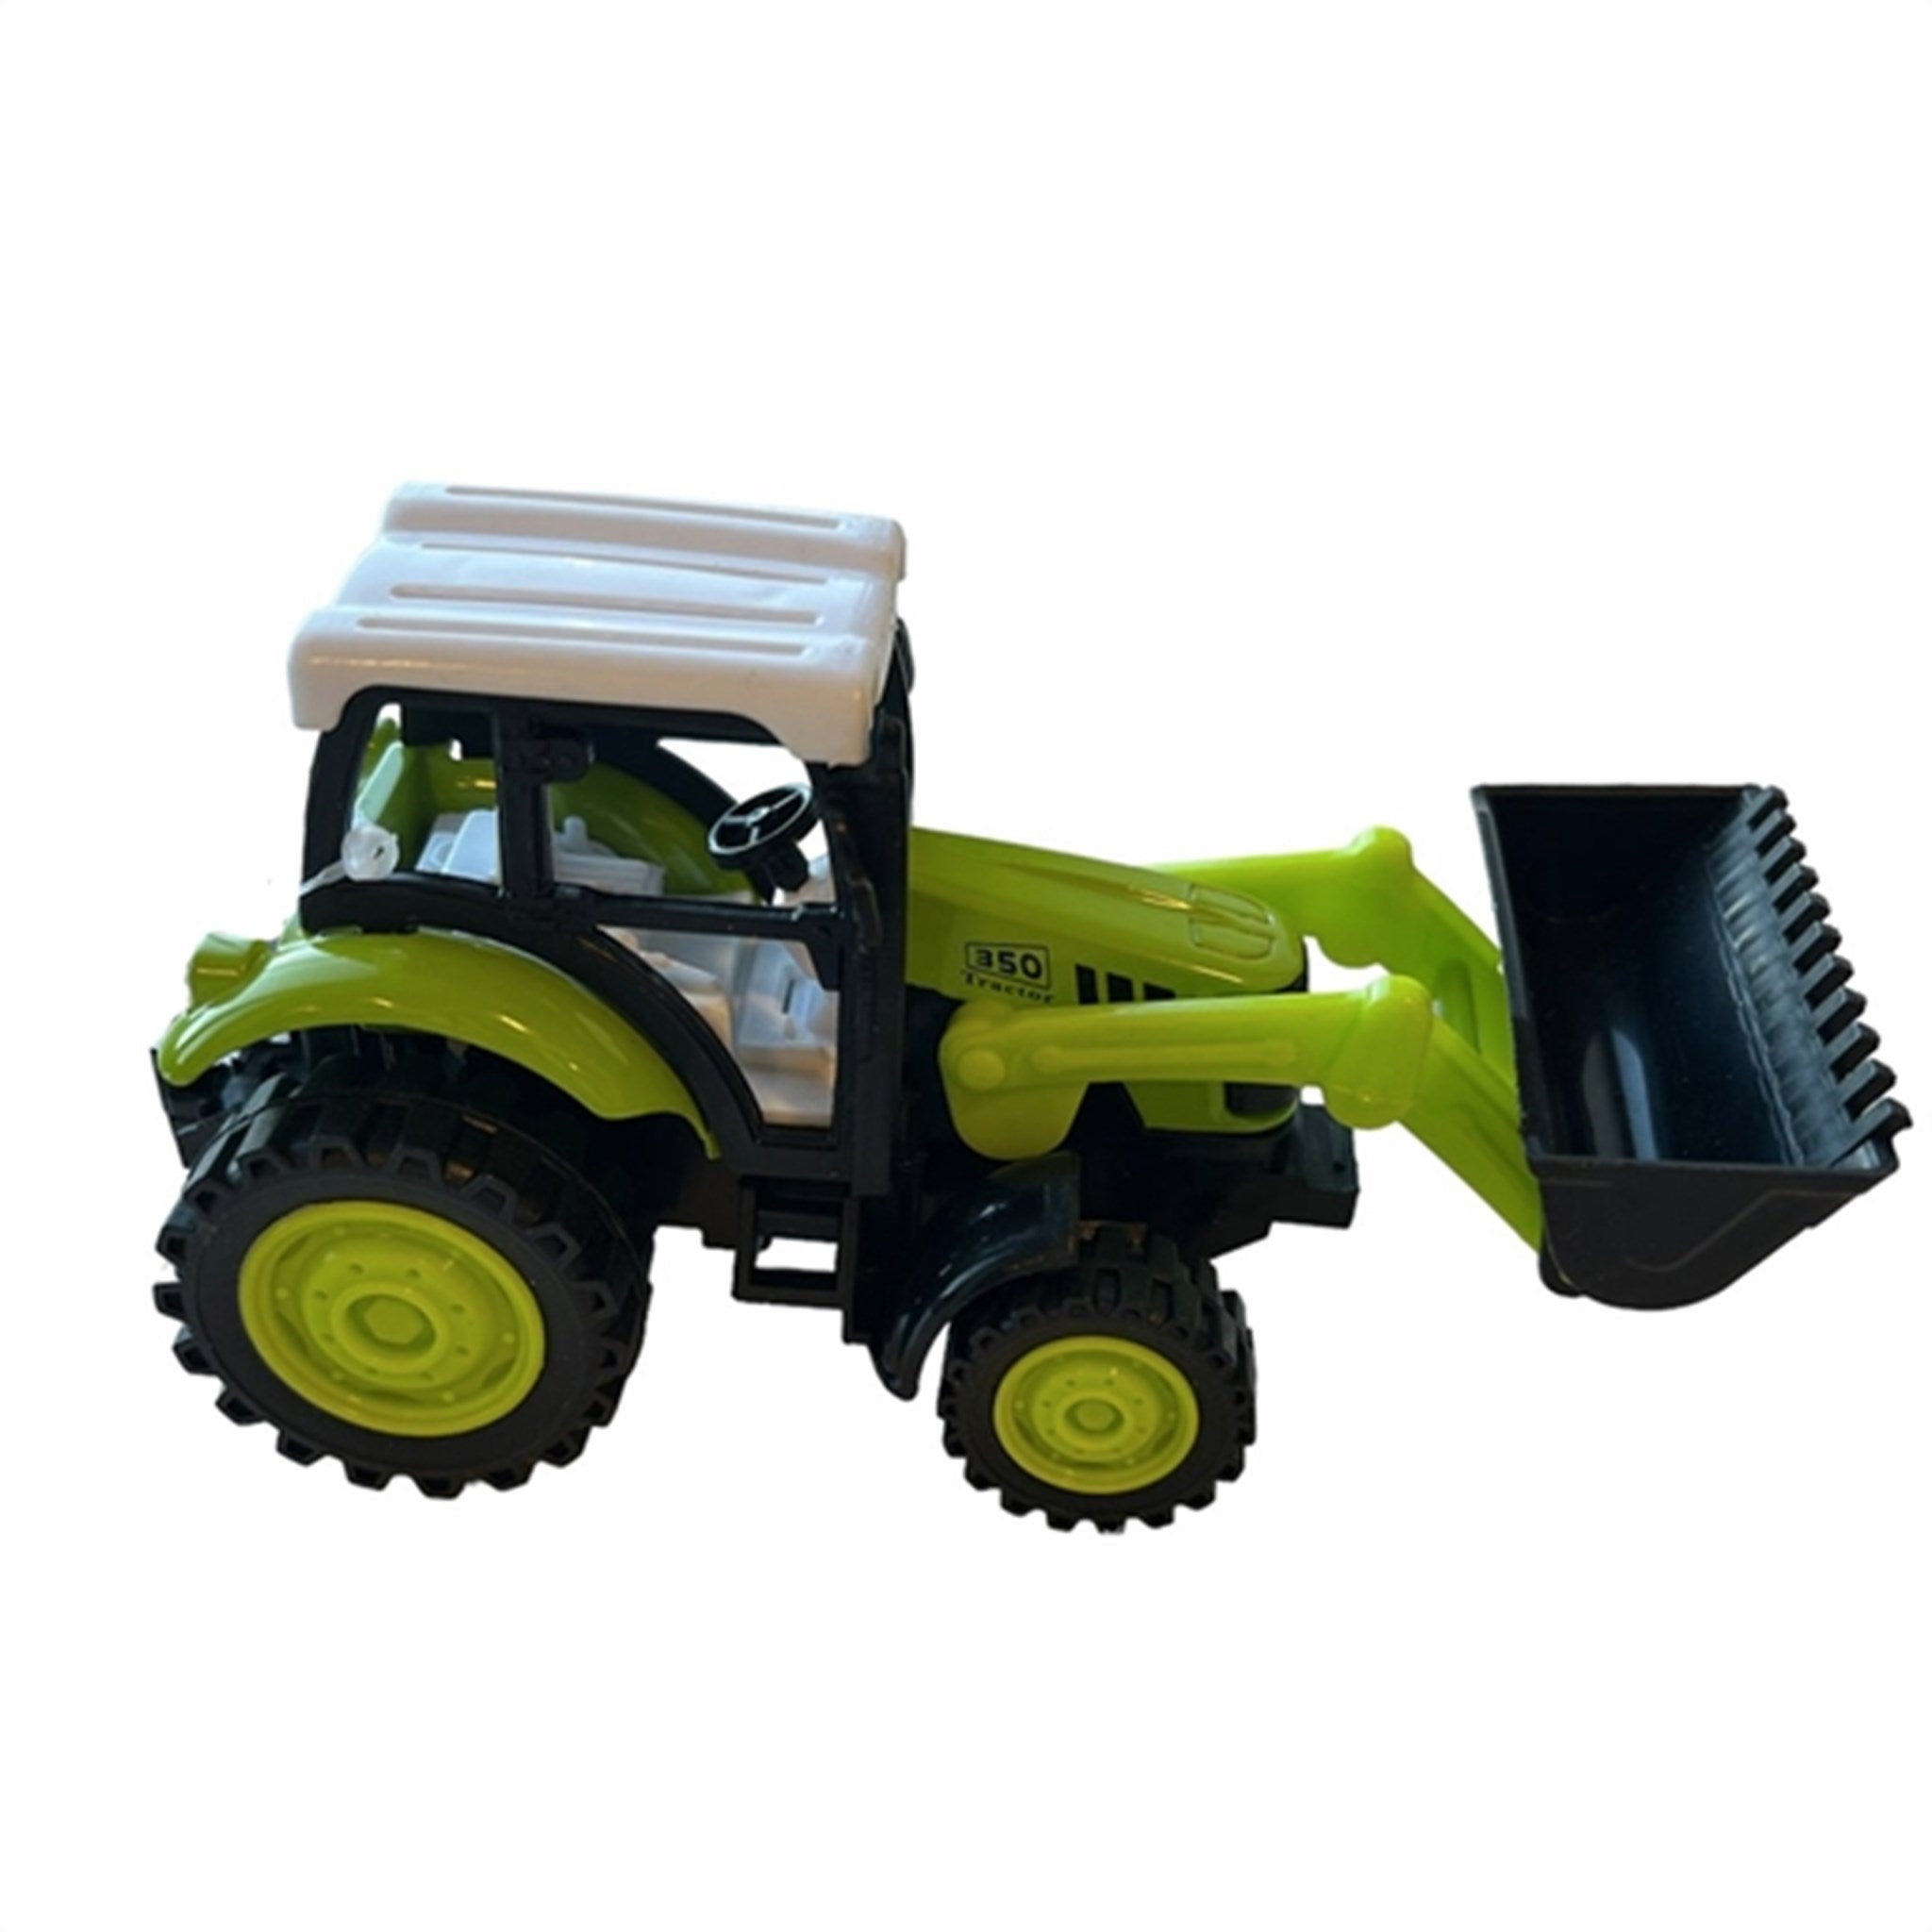 Magni Tractor With Front Loader - Light Green